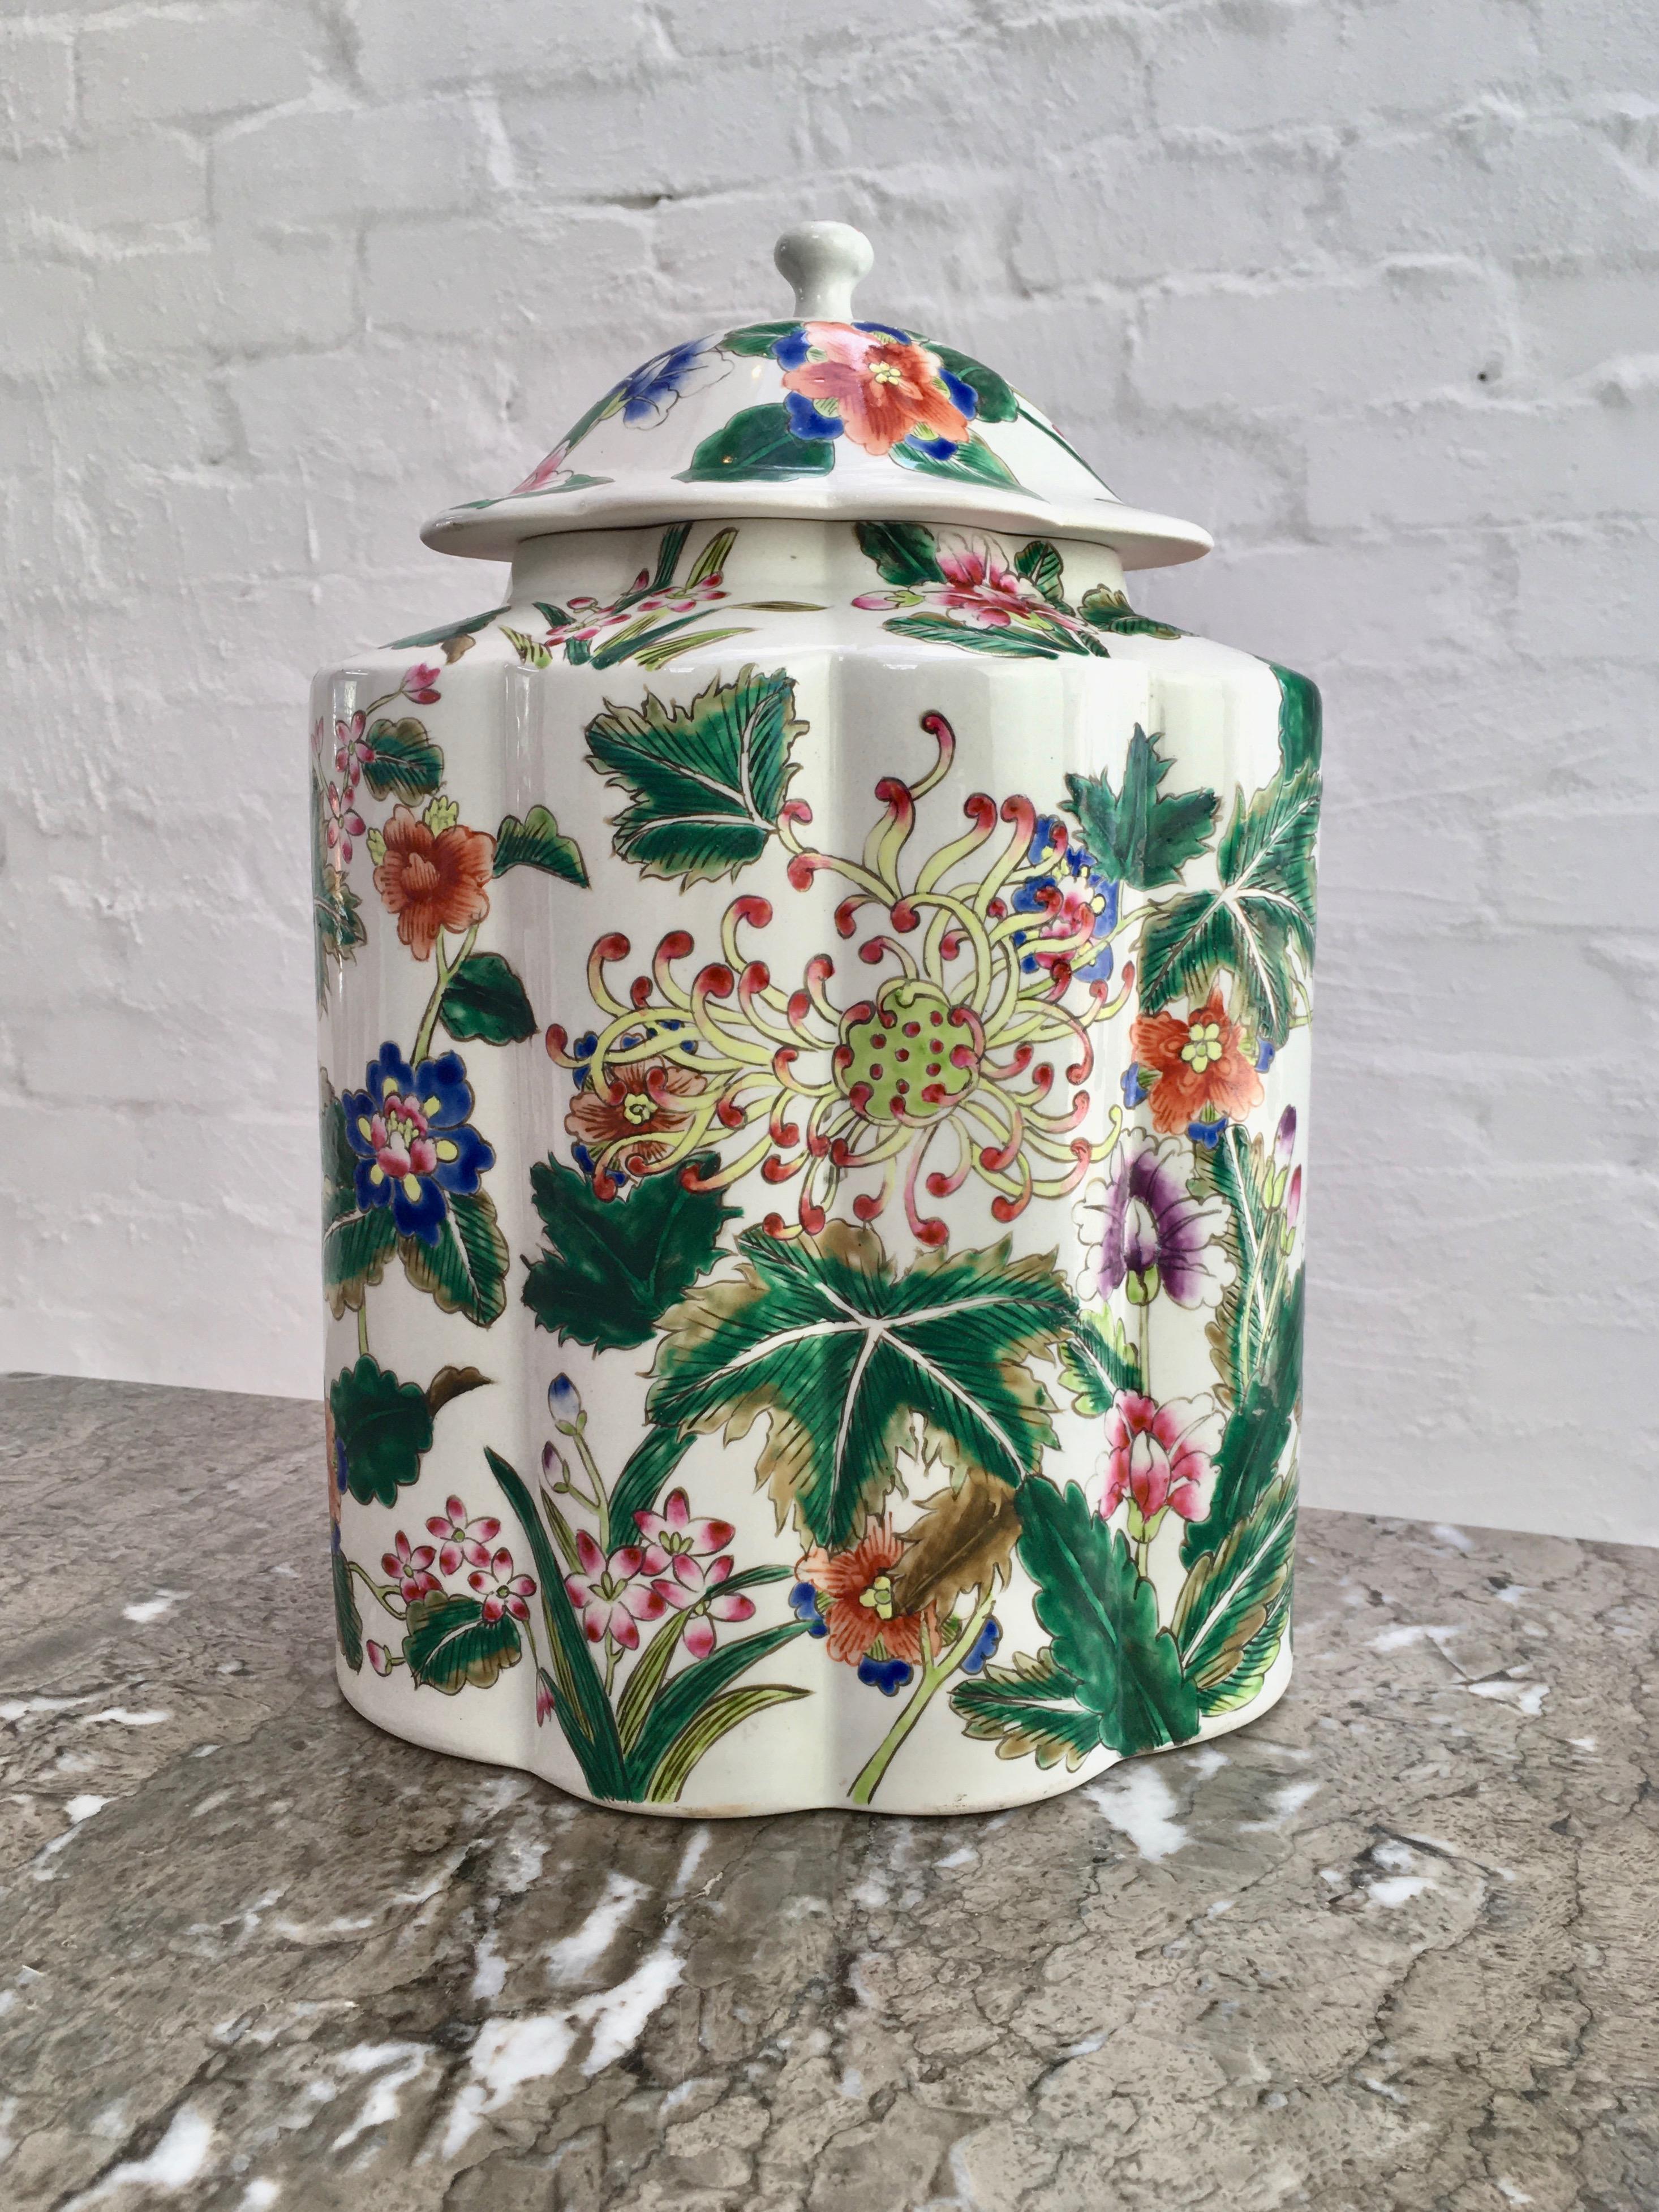 A large polychrome lobed, lidded jar in the Famille Verte Kangxi decorative style. This jar is certainly not 19th Century and possibly not a Chinese production. 

Yet, it is highly decorative in size, shape, floral design and colour, making it a